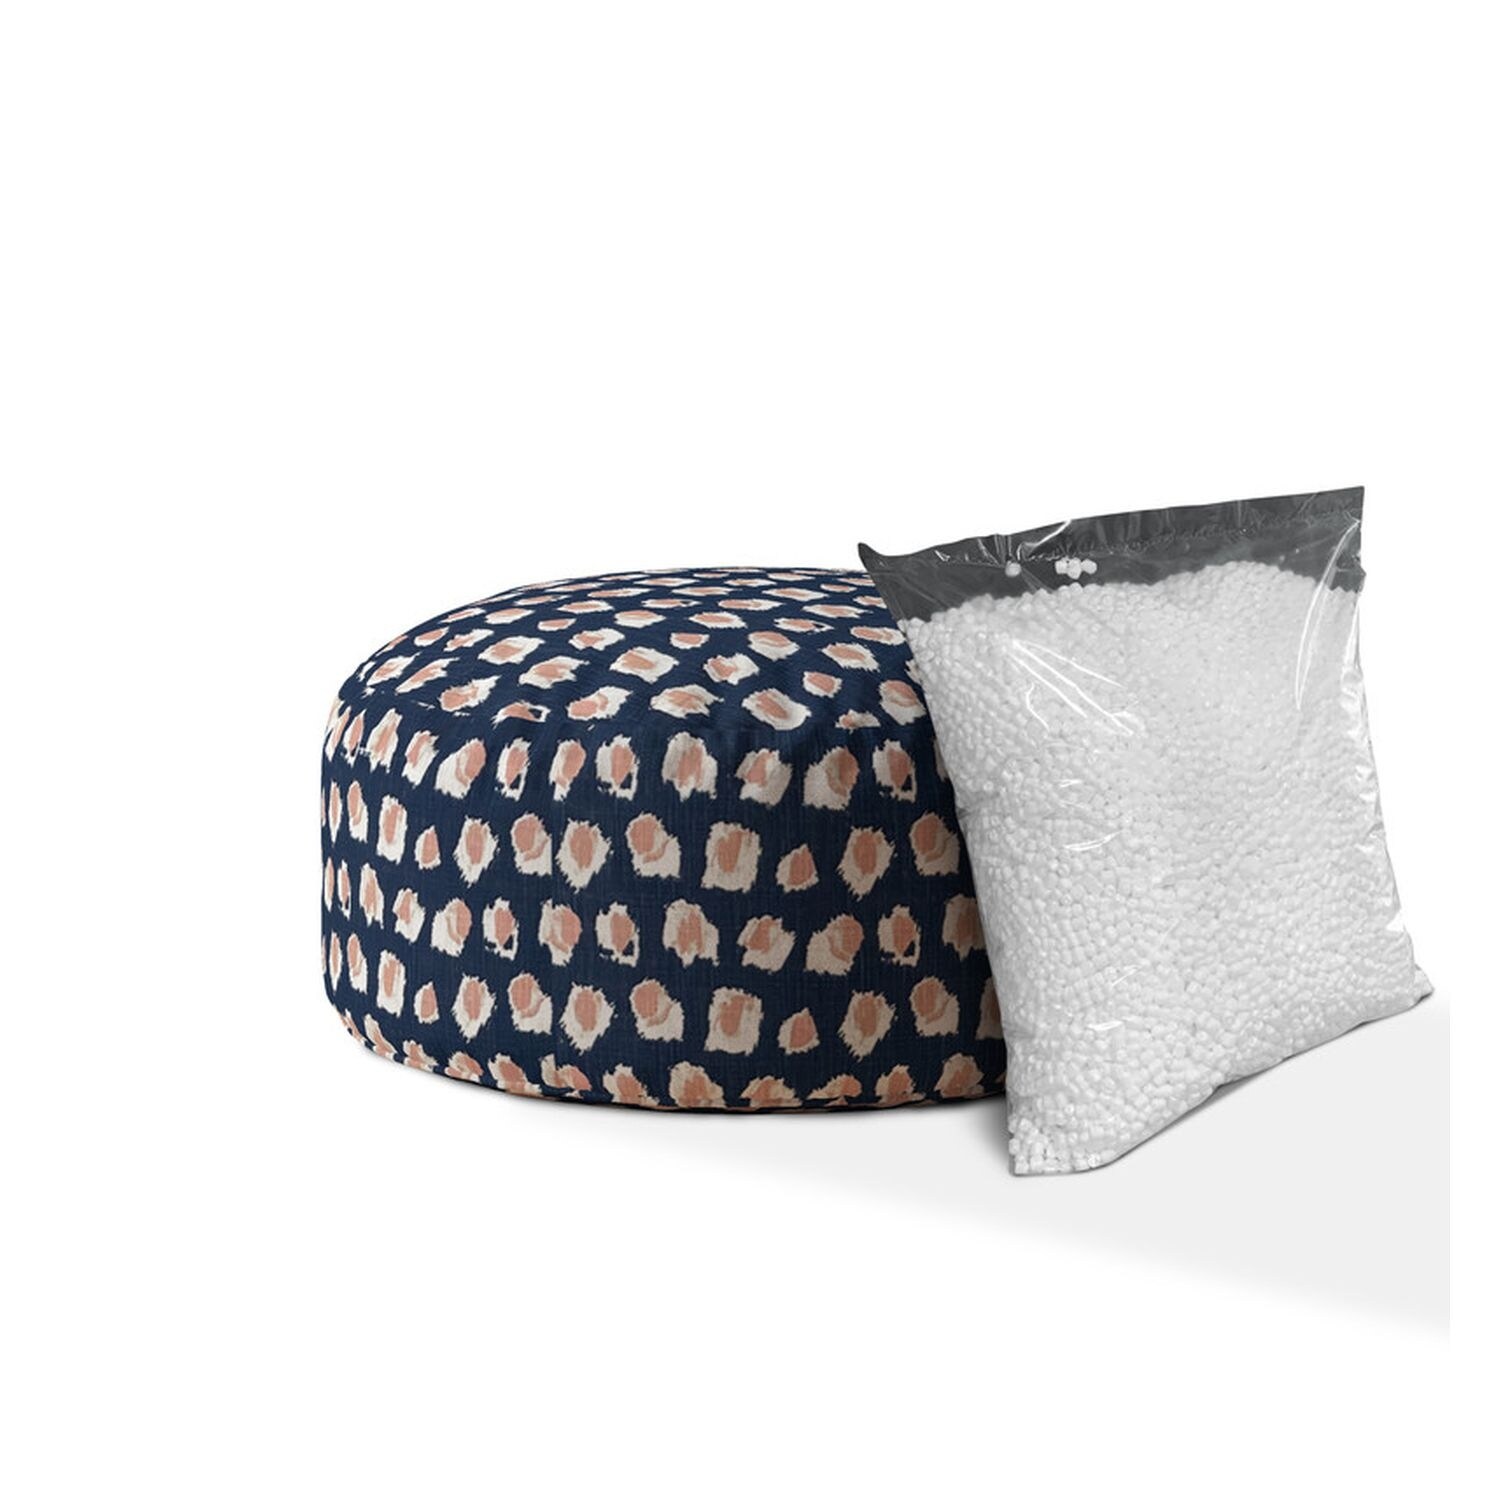 Indoor PLABO Denim/Blush Round Zipper Pouf - Stuffed - Extra Beads  Included! - 24in dia x 20in tall - On Sale - Bed Bath & Beyond - 37251323